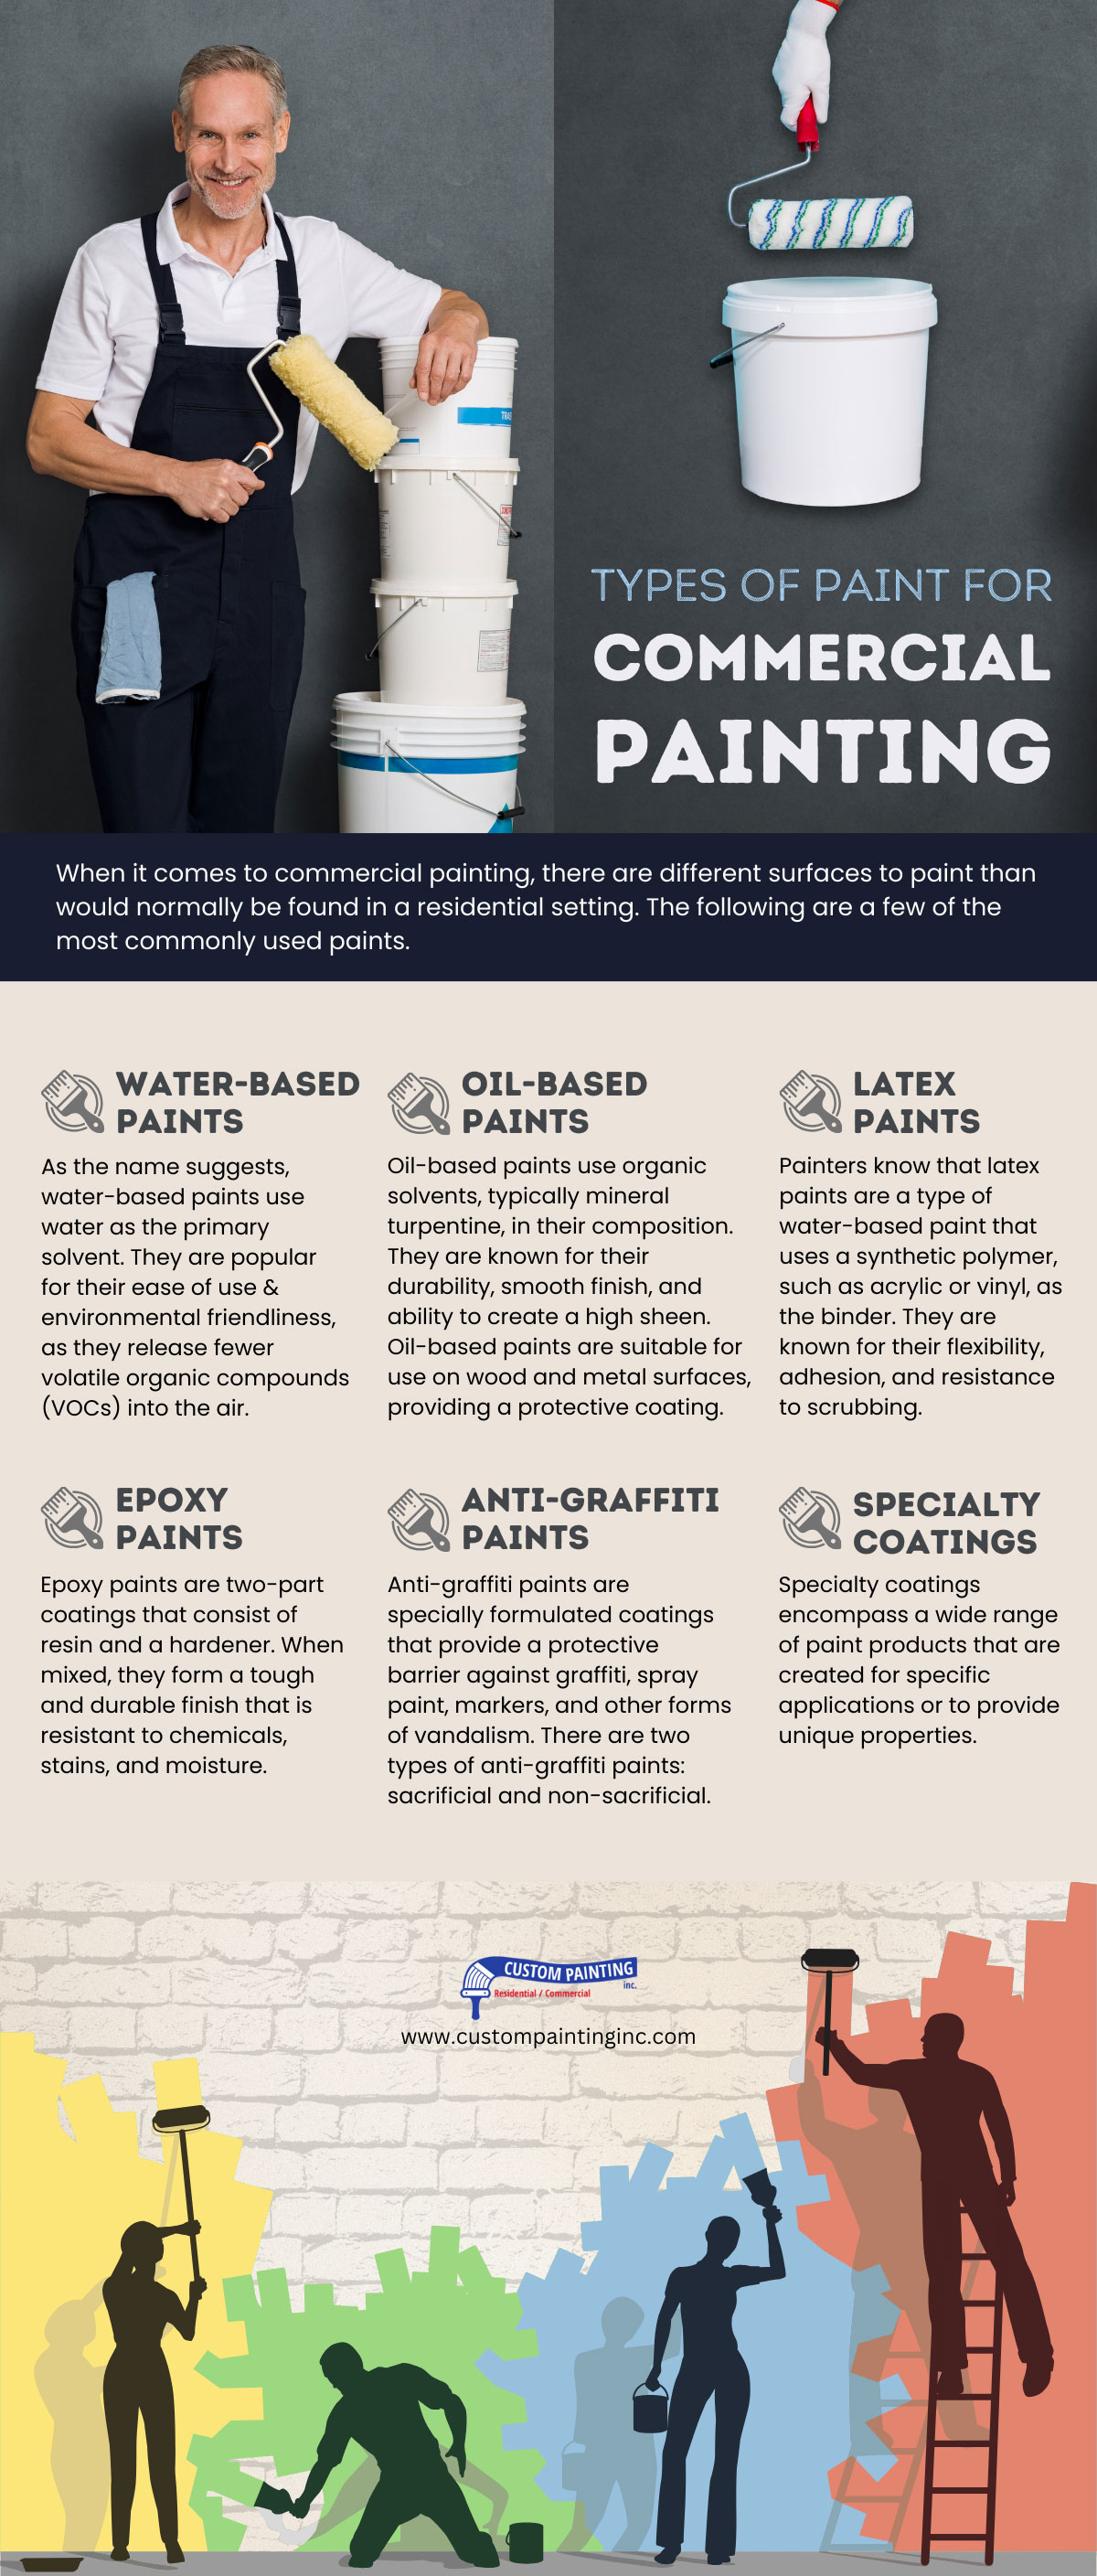 Acrylic Resin for Paint & Coatings: Types, Properties, Application